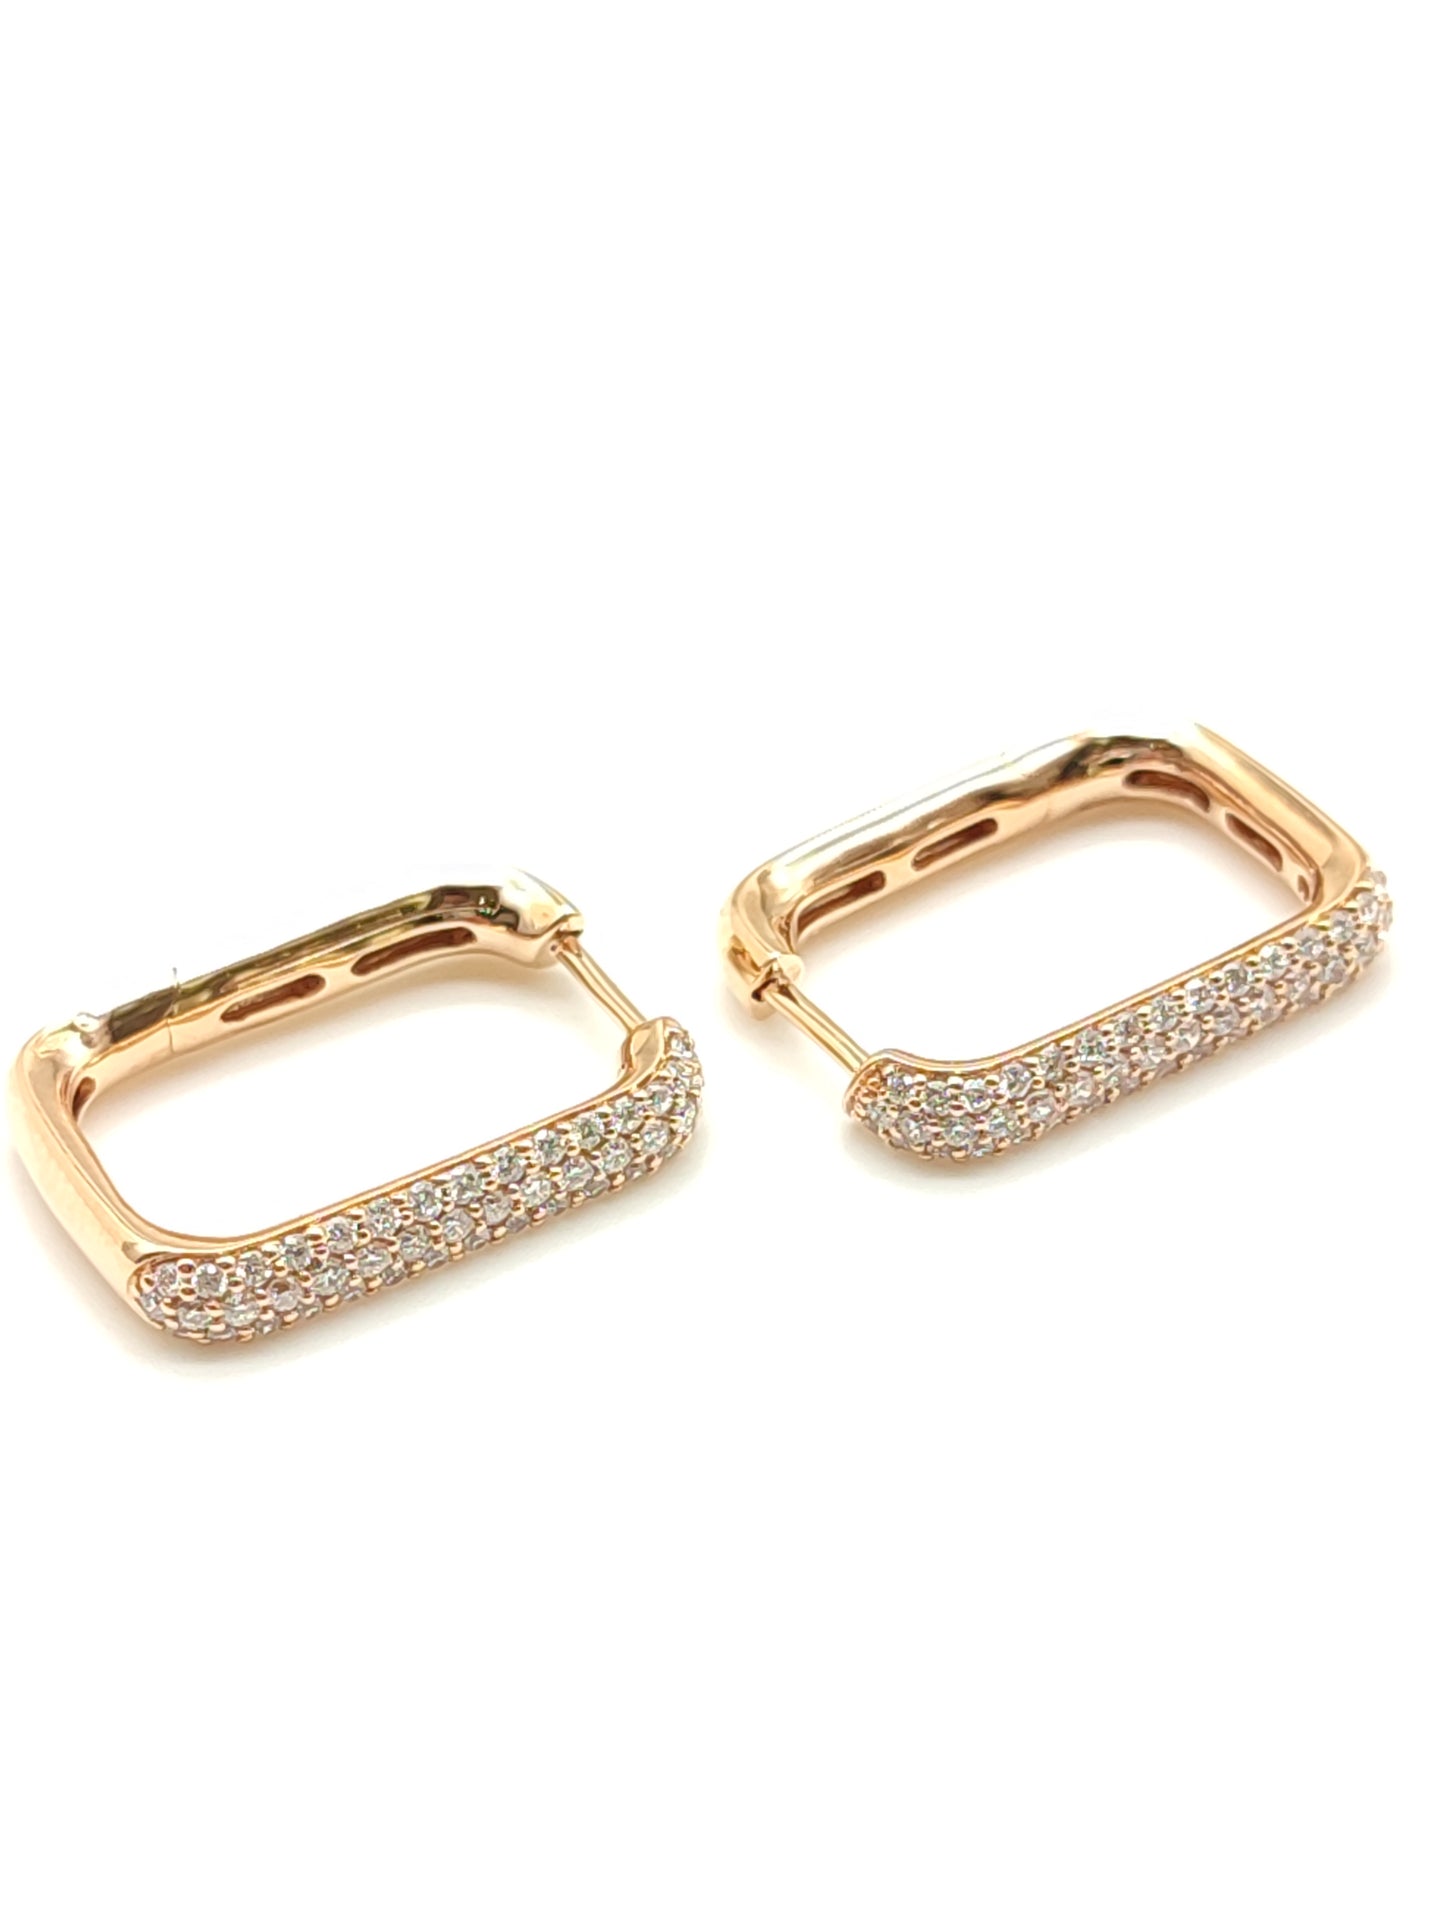 Rectangular earrings in rose gold with diamonds